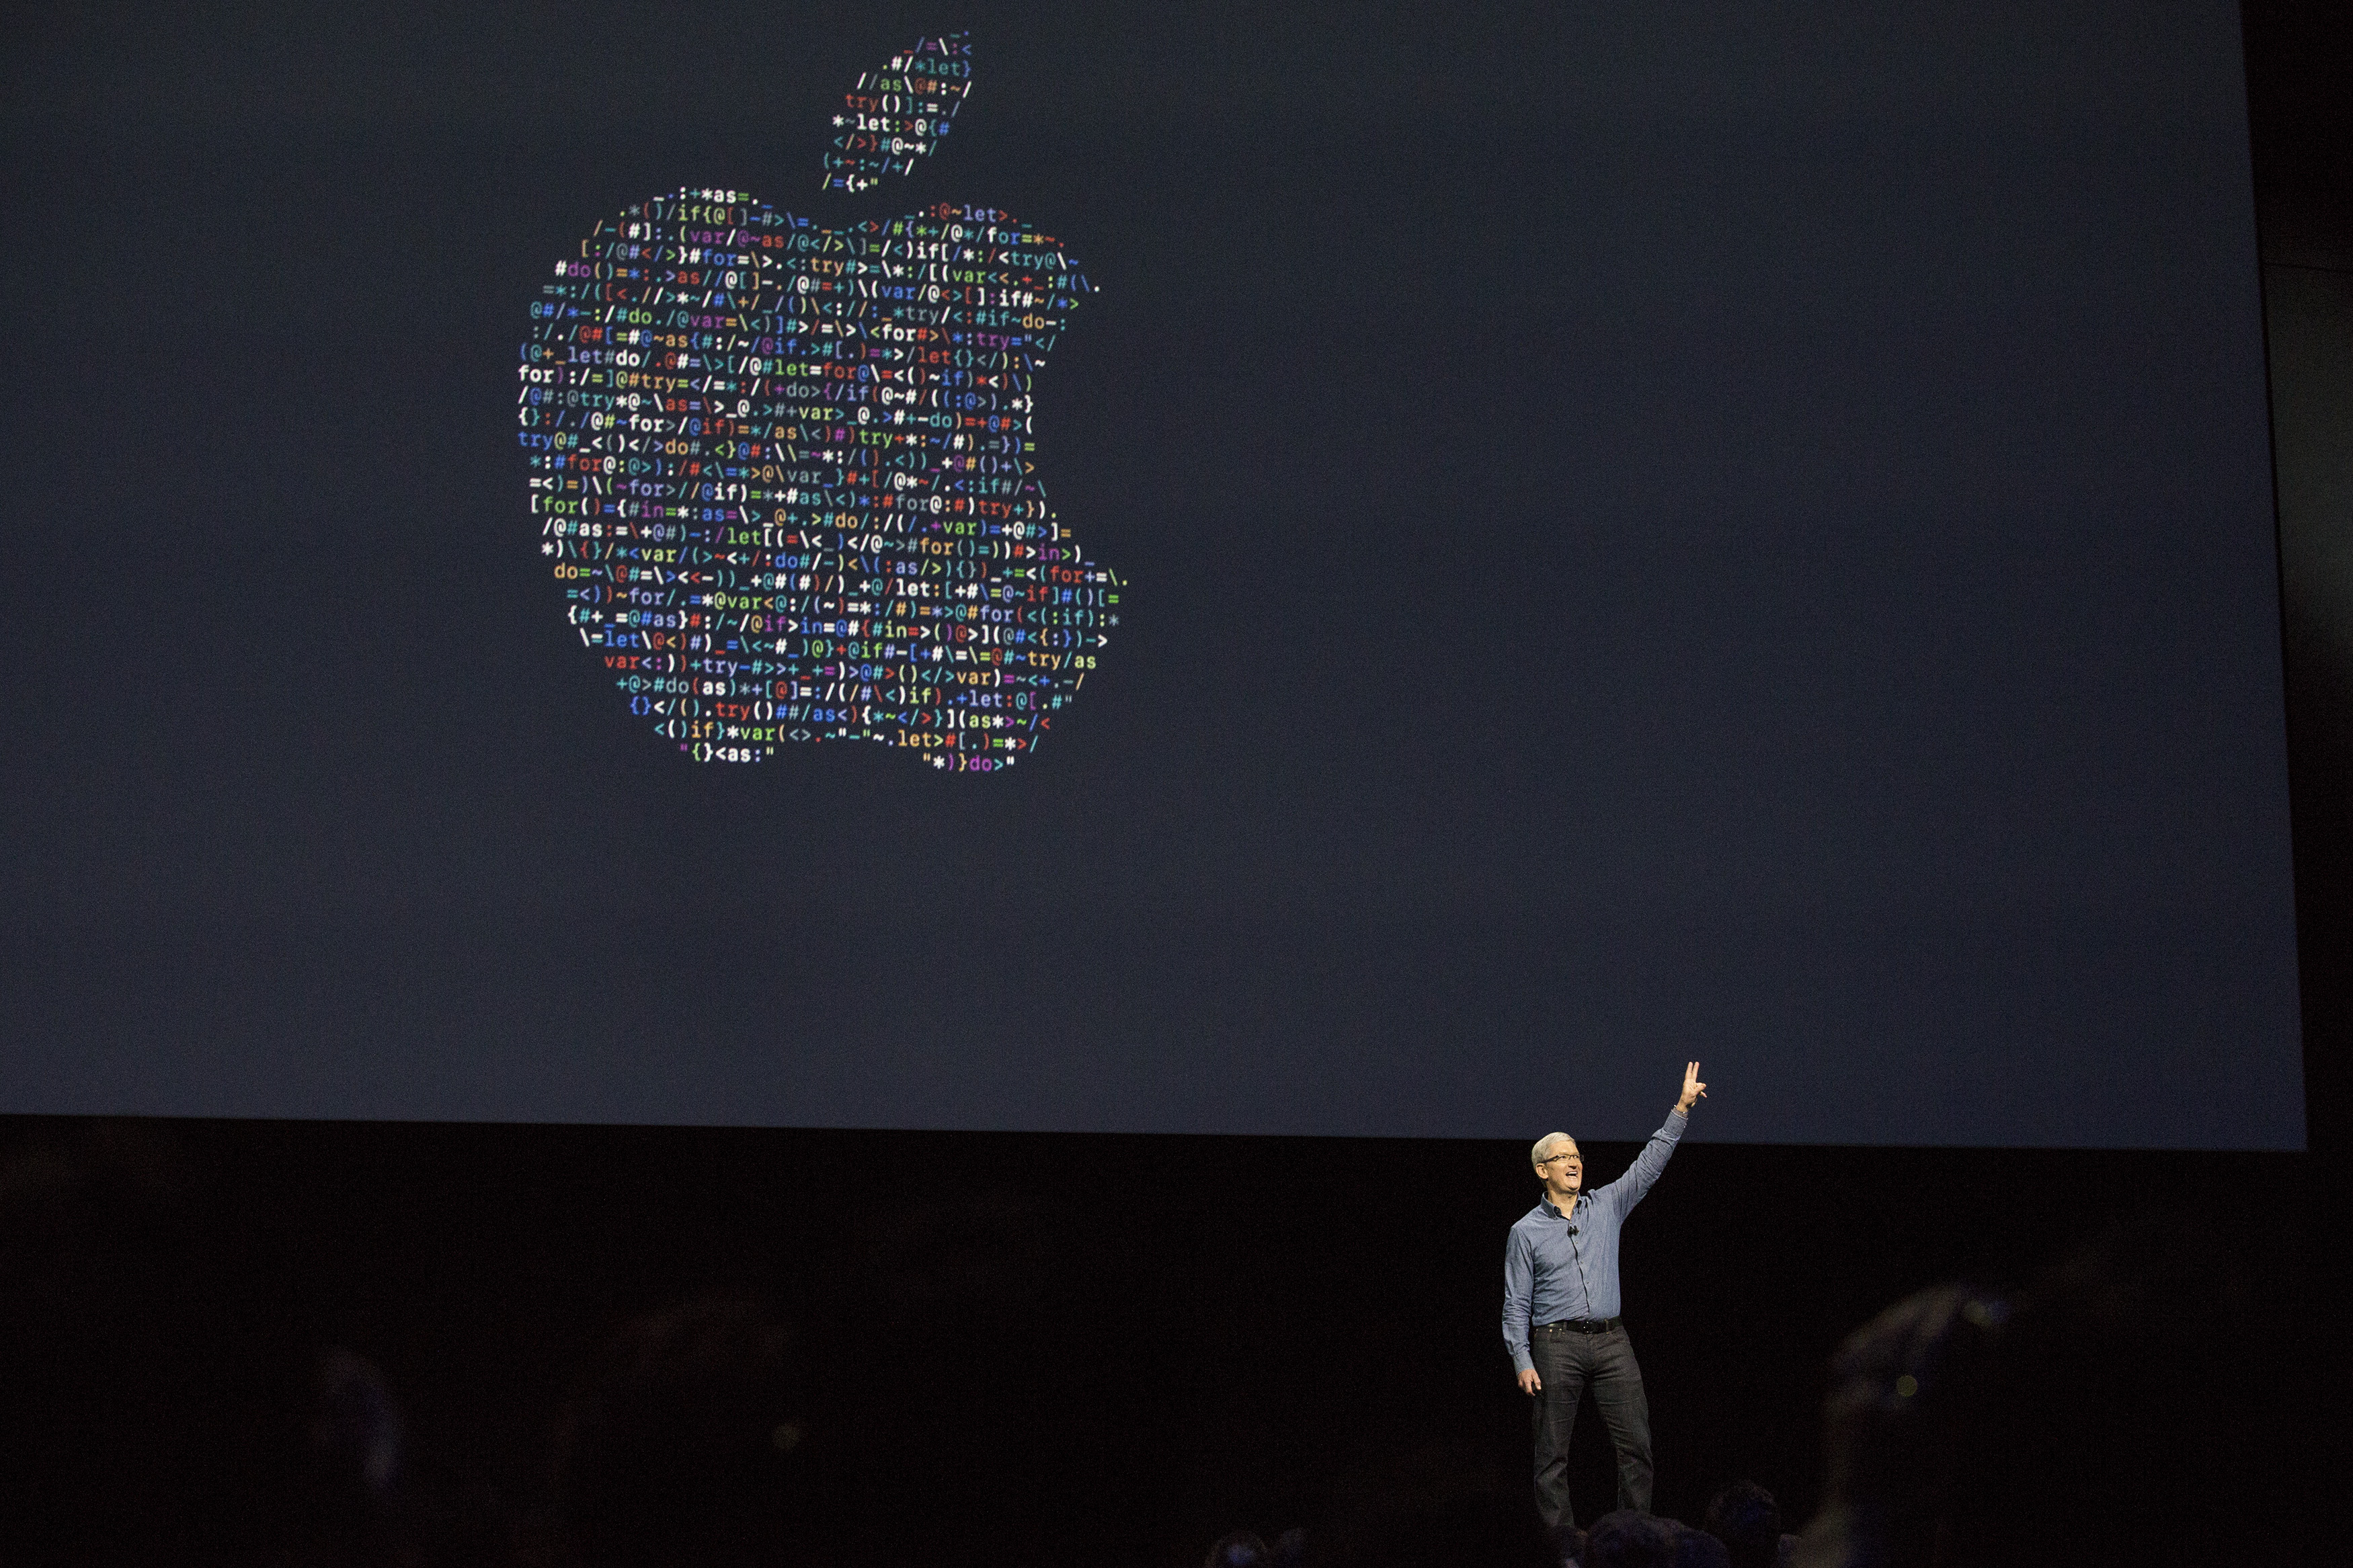 Apple CEO Tim Cook waves good bye after speaking at an Apple event at the Worldwide Developer's Conference on June 13, 2016 in San Francisco, California. (Andrew Burton&mdash;Getty Images)